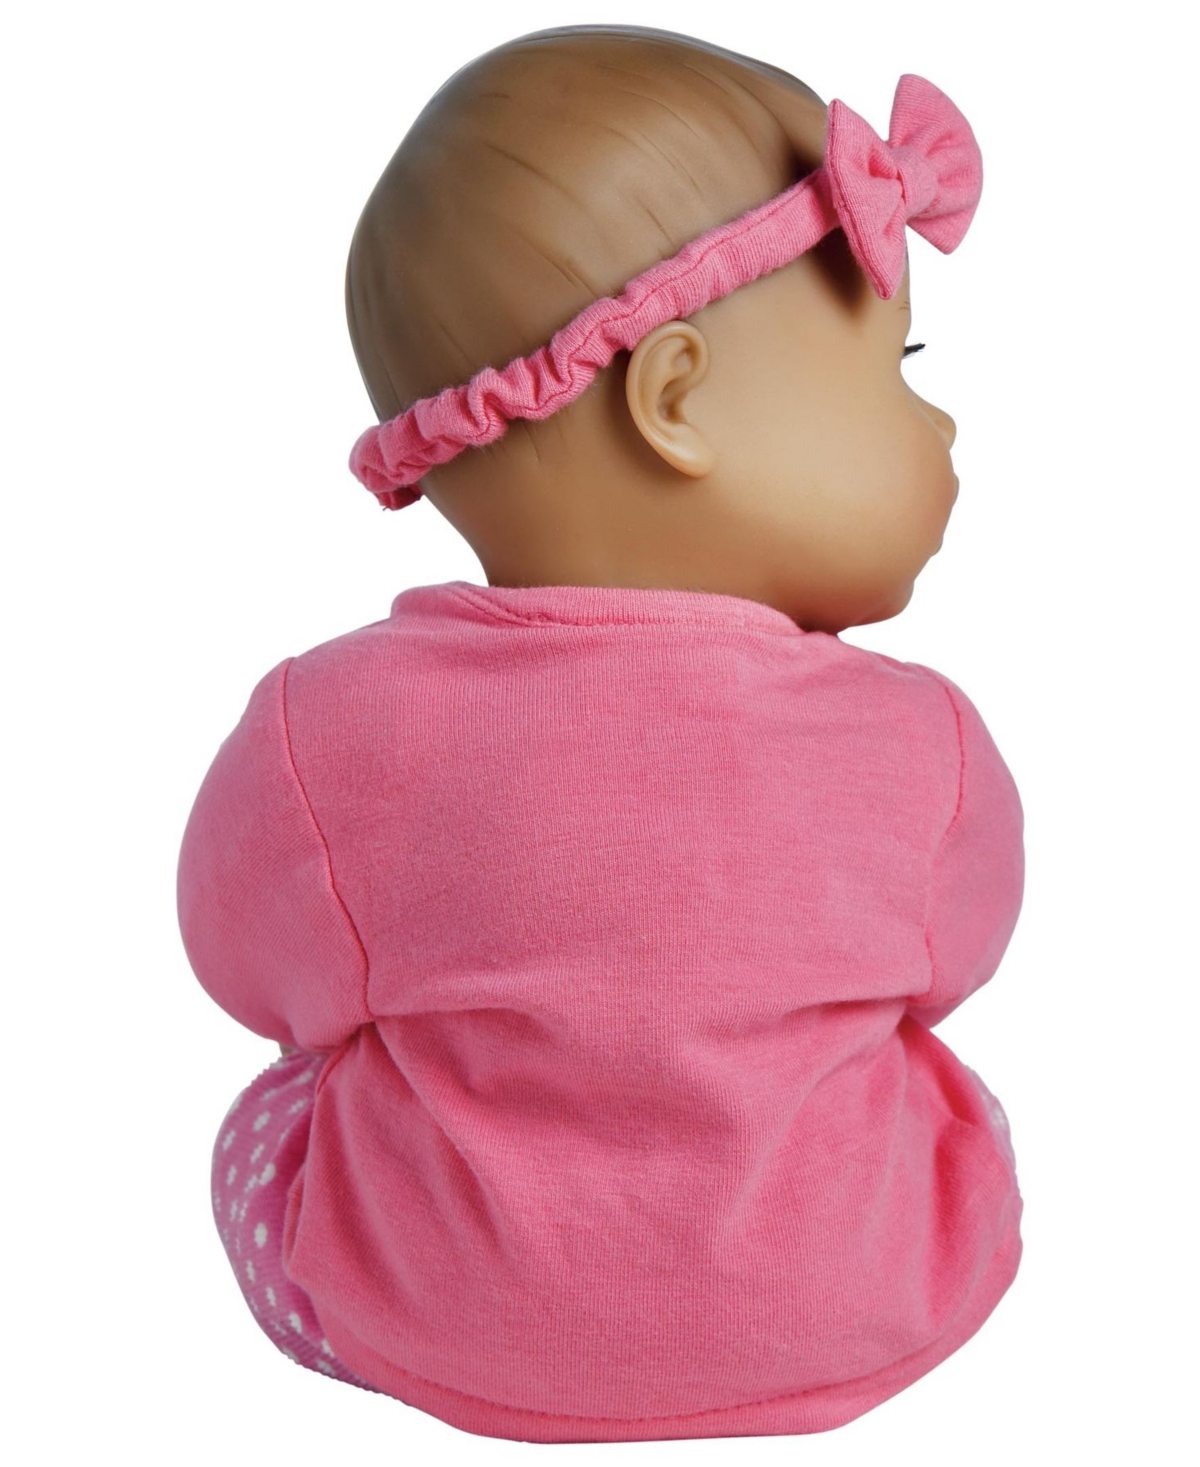 Shop Adora Playtime Baby Pink Doll In Multi